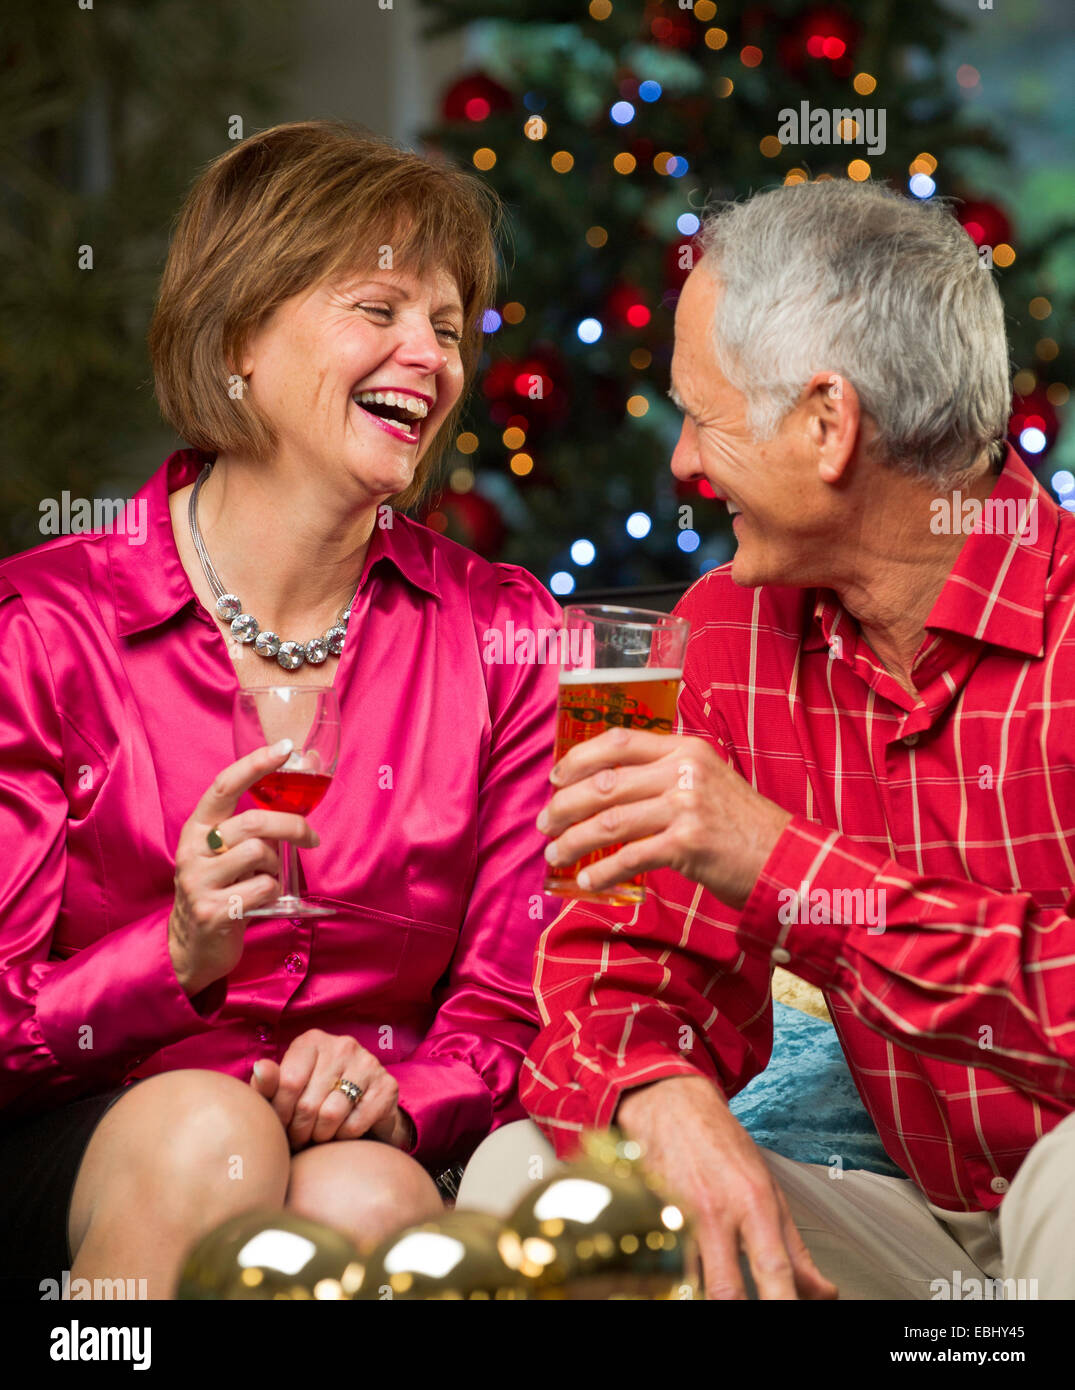 Man and woman having a Christmas drink with Xmas tree in background Stock Photo